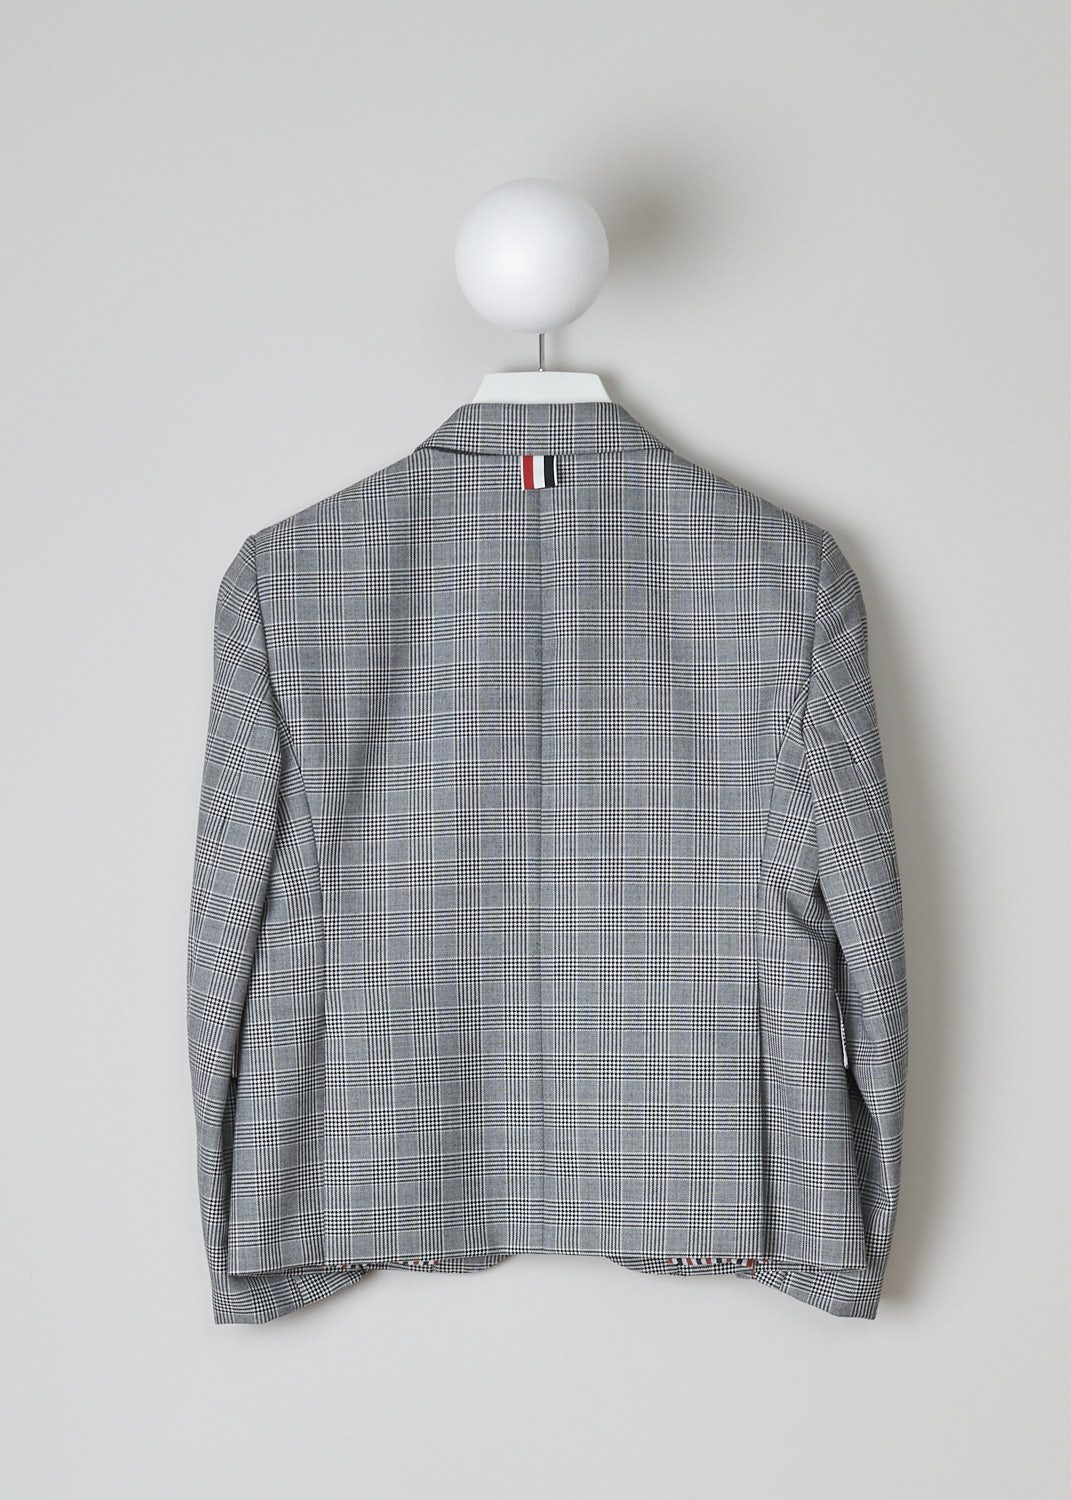 THOM BROWNE, BLACK AND WHITE CHECK SPORT JACKET, FBC010A_25057_980, Black, White, Back, This single-breasted sport jacket has a black and white houndstooth check motif. The jacket has a notched lapel and a front button closure. In the front, the jacket has a single breast pocket and two flap welt pockets. On the inside, the jacket has a striped lining, three inner pockets and a name tag. The brand's signature striped grosgrain loop tab can be found in the back. The jacket has a double vent.  
